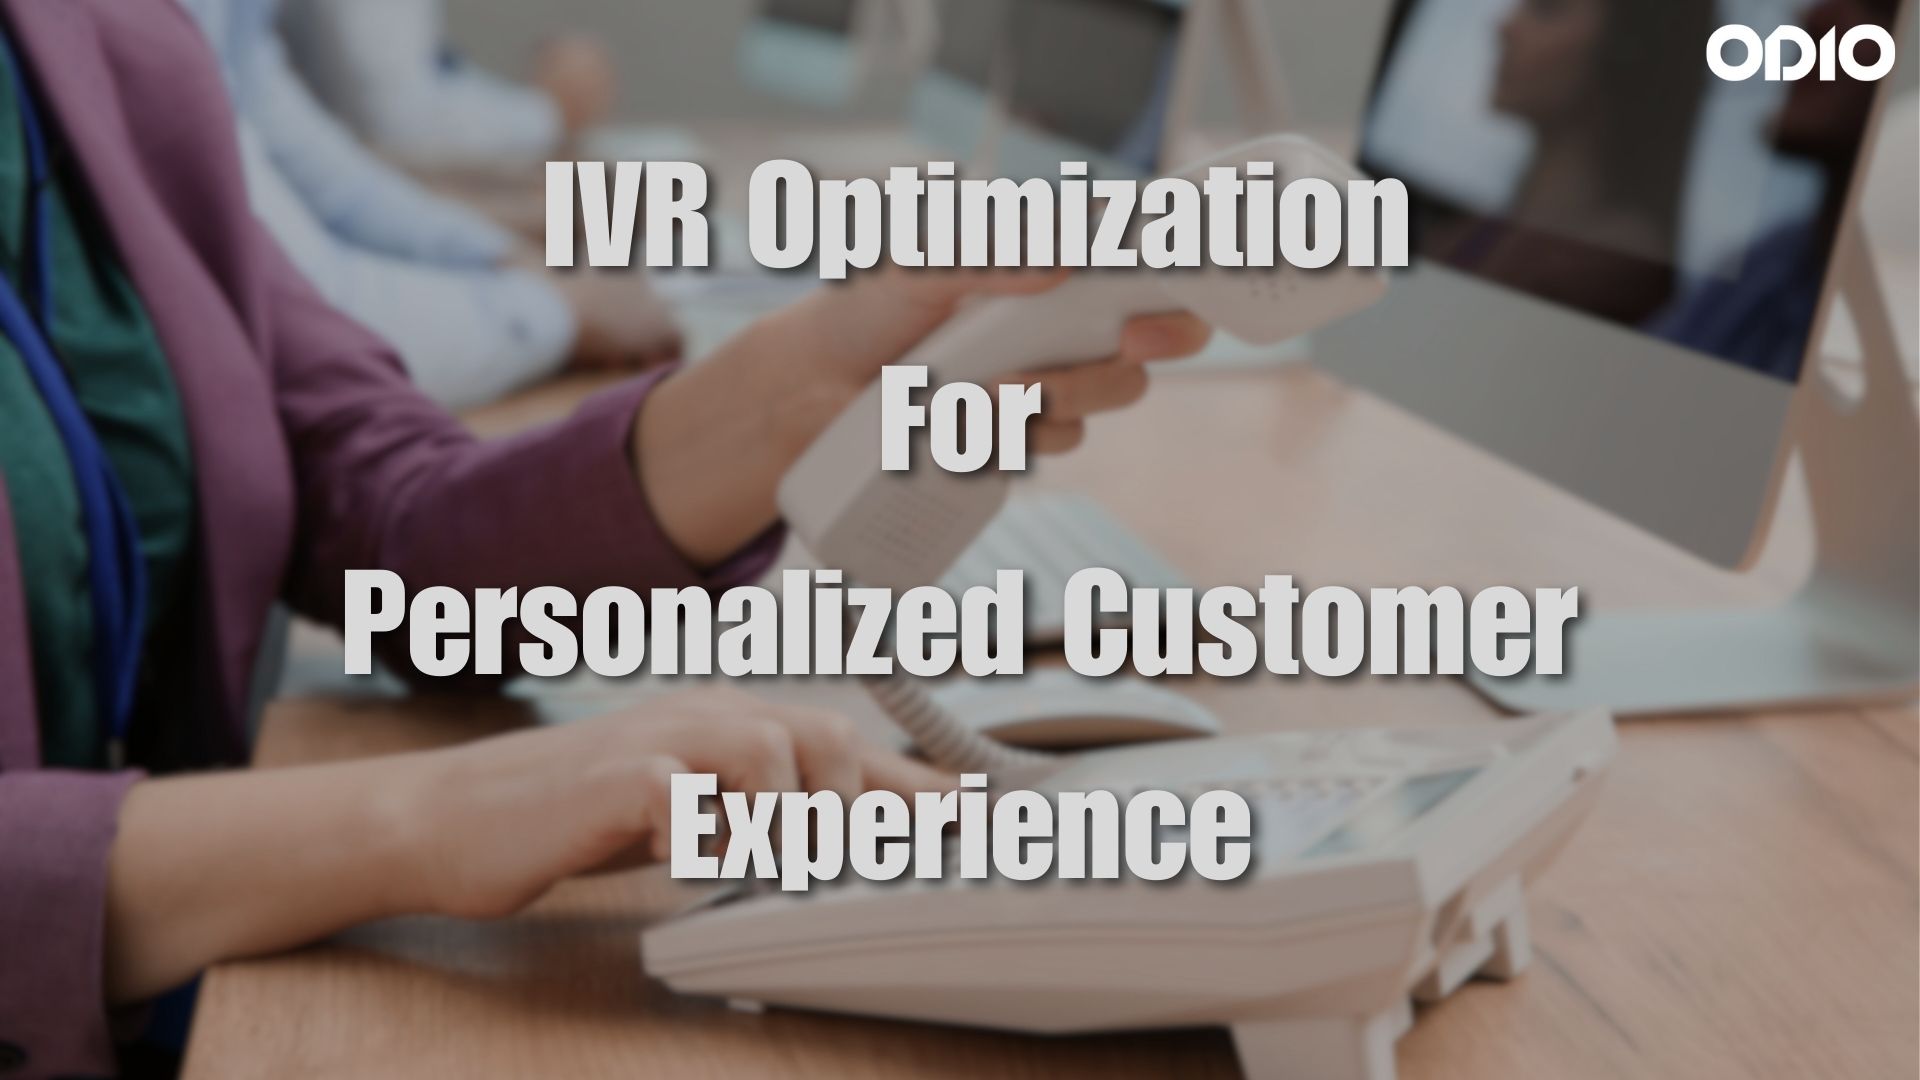 Image showing a person dialing a number to insinuate IVR Optimization For Personalized Customer Experience